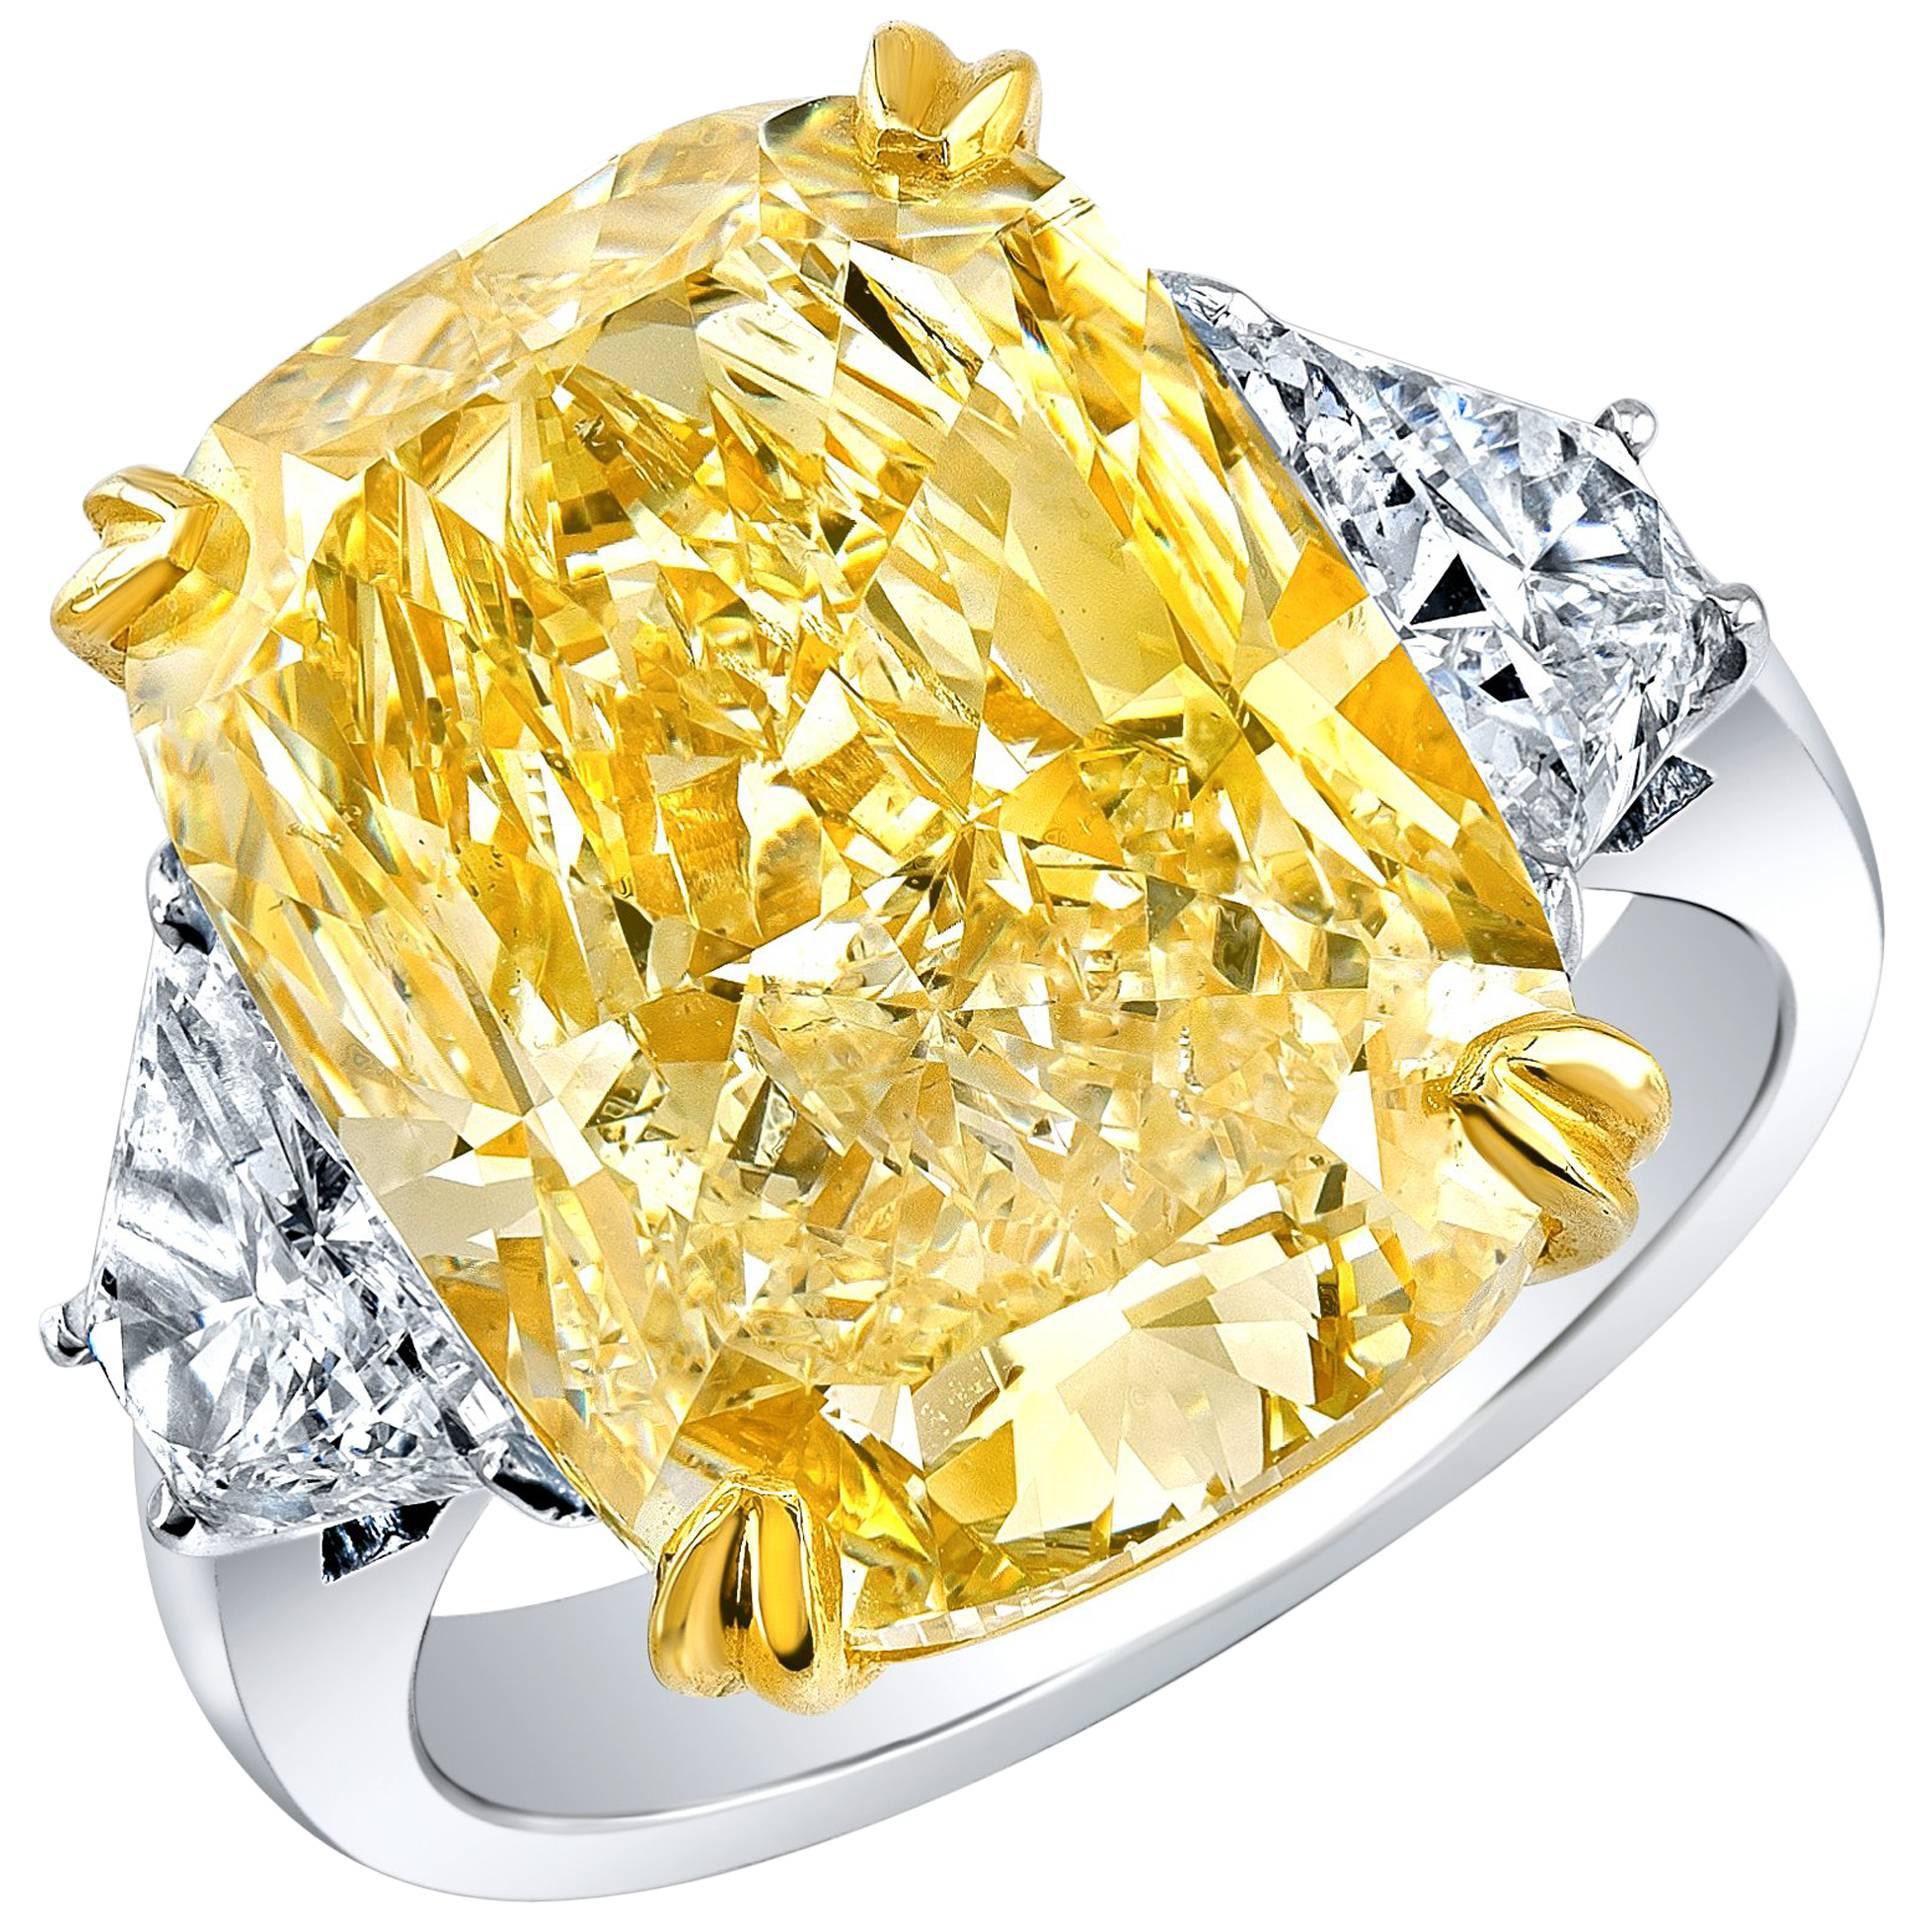 Shreve, Crump & Low 10.52 carat Canary Diamond Engagement Ring For Sale